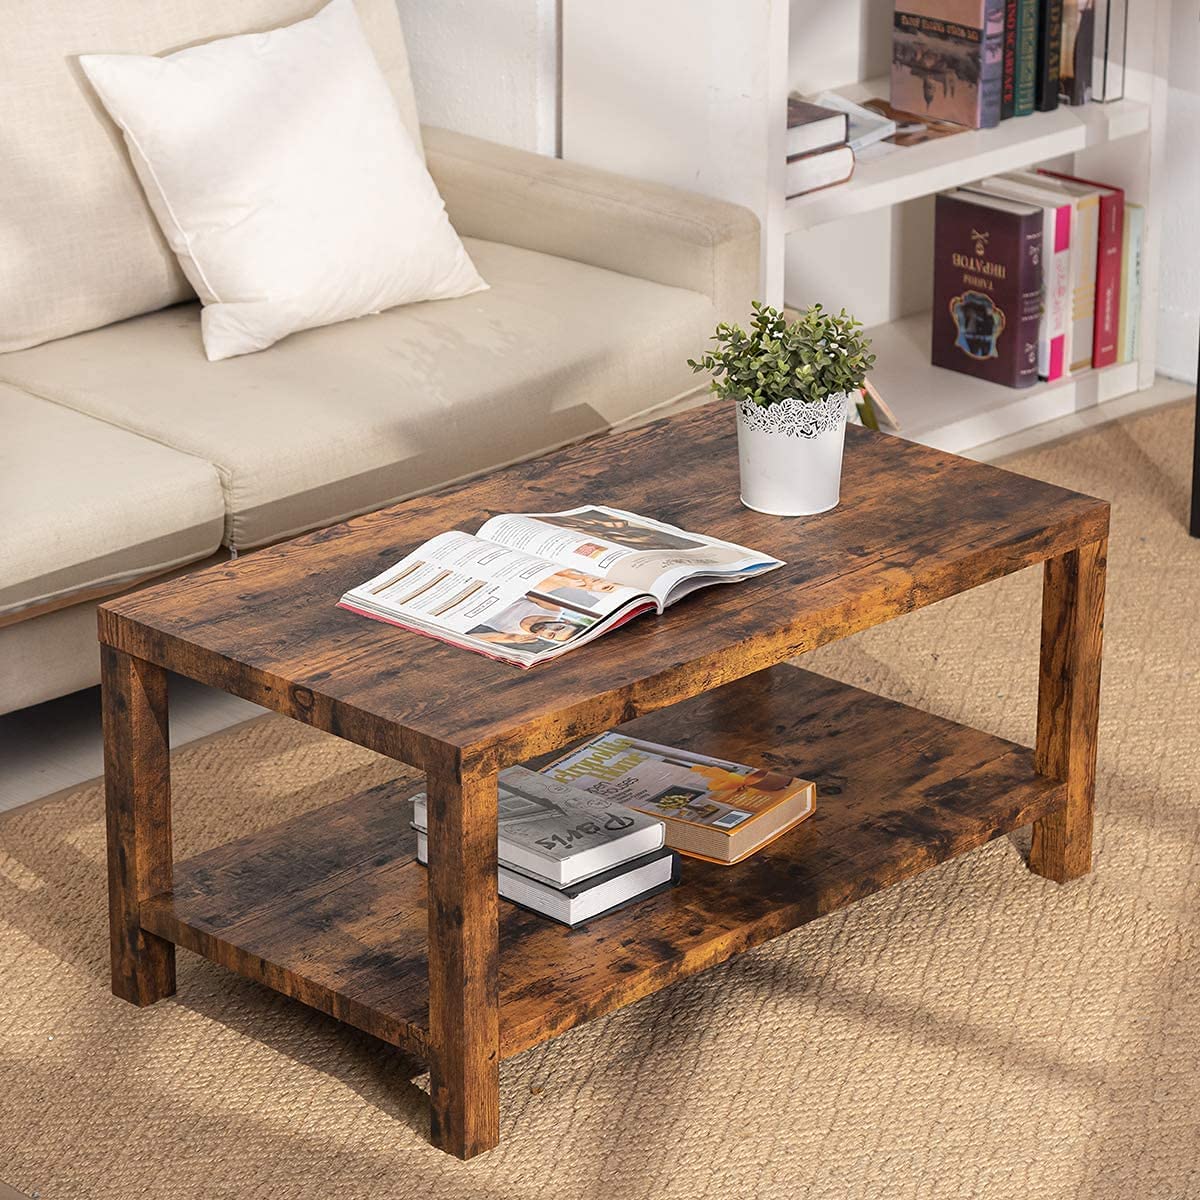 Rustic Farmhouse Coffee Table, Living Room Table with Storage Shelf, Two-Tier Coffee Table for Living Room